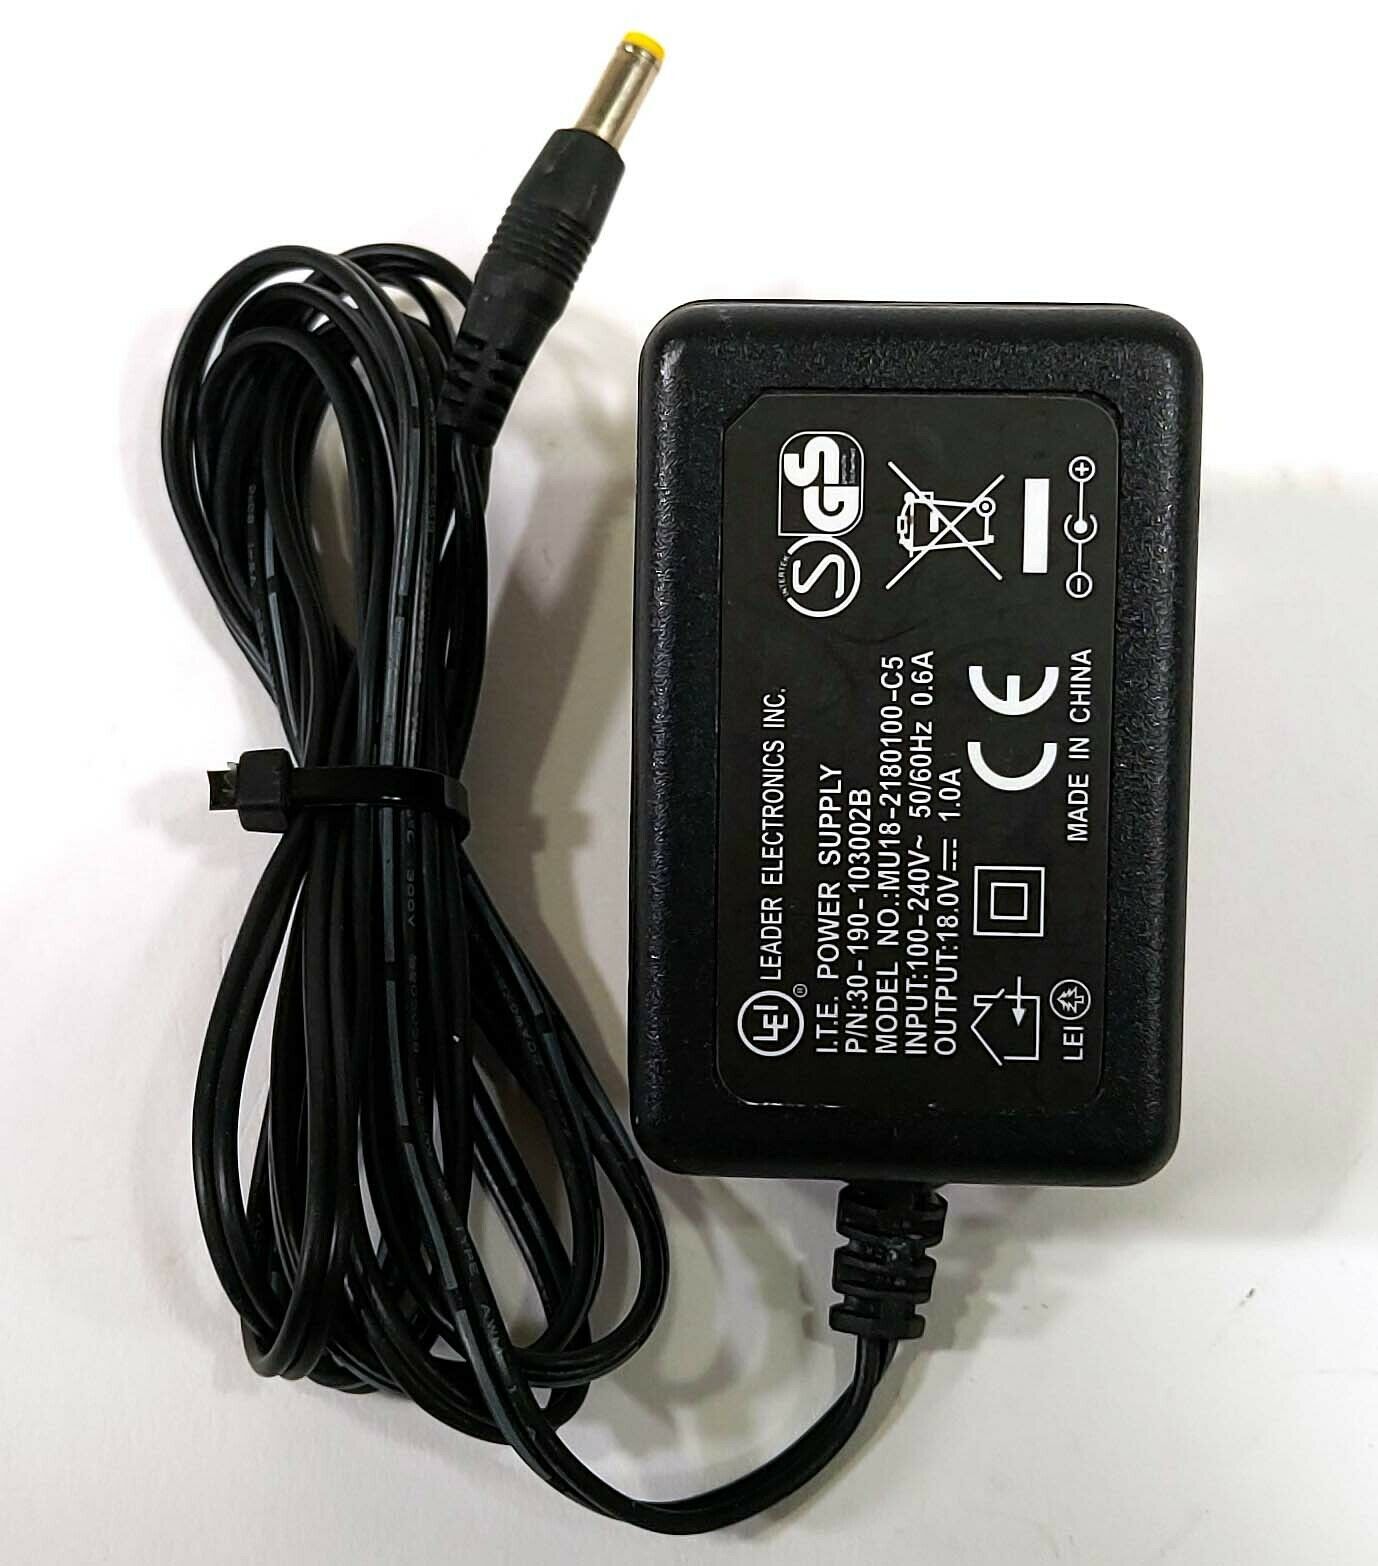 LEI Leader MU18-2180100-C5 AC/DC Adapter 18V 1A Power Supply Output Current: 1 A Compatible Brand: Universal Unit Type